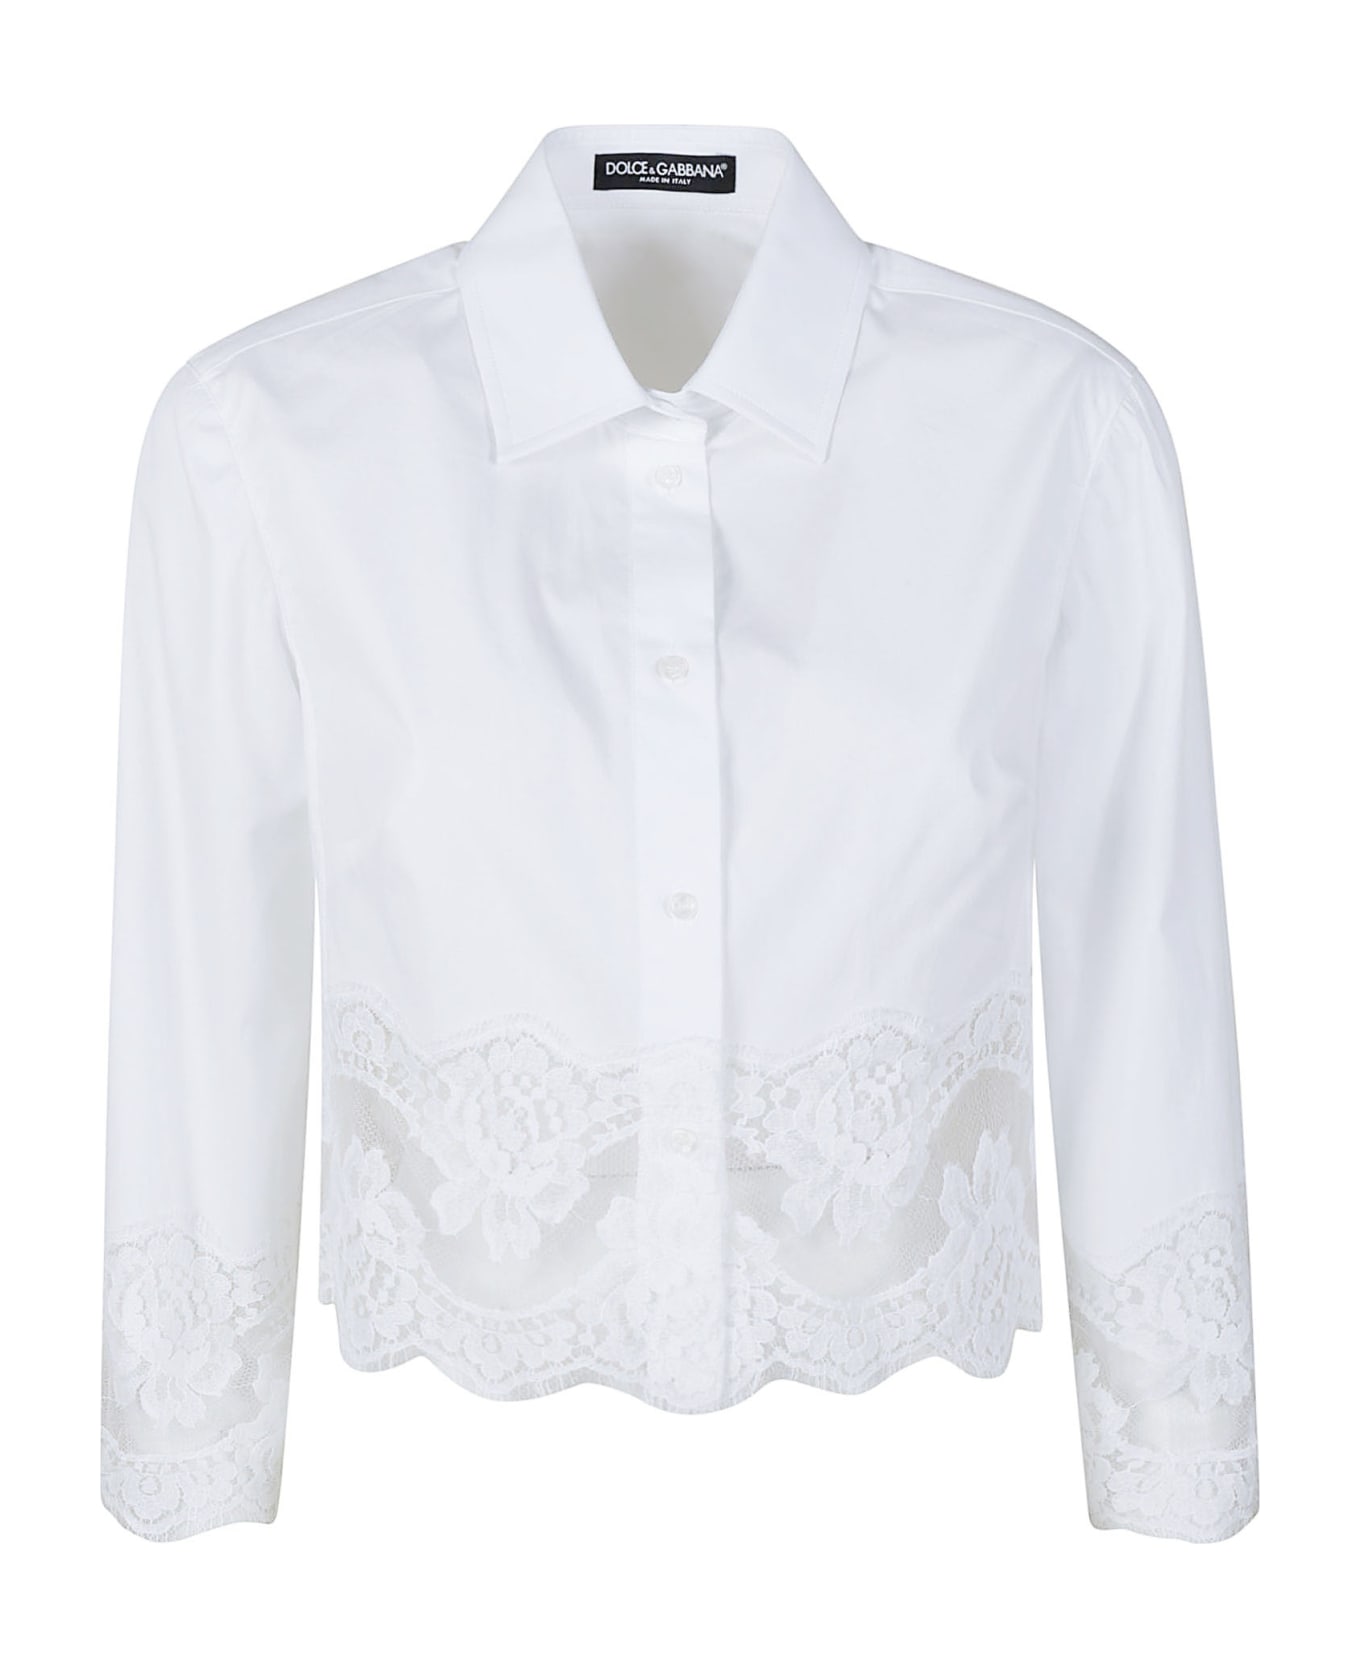 Dolce & Gabbana Lace Floral Cropped Shirt - White